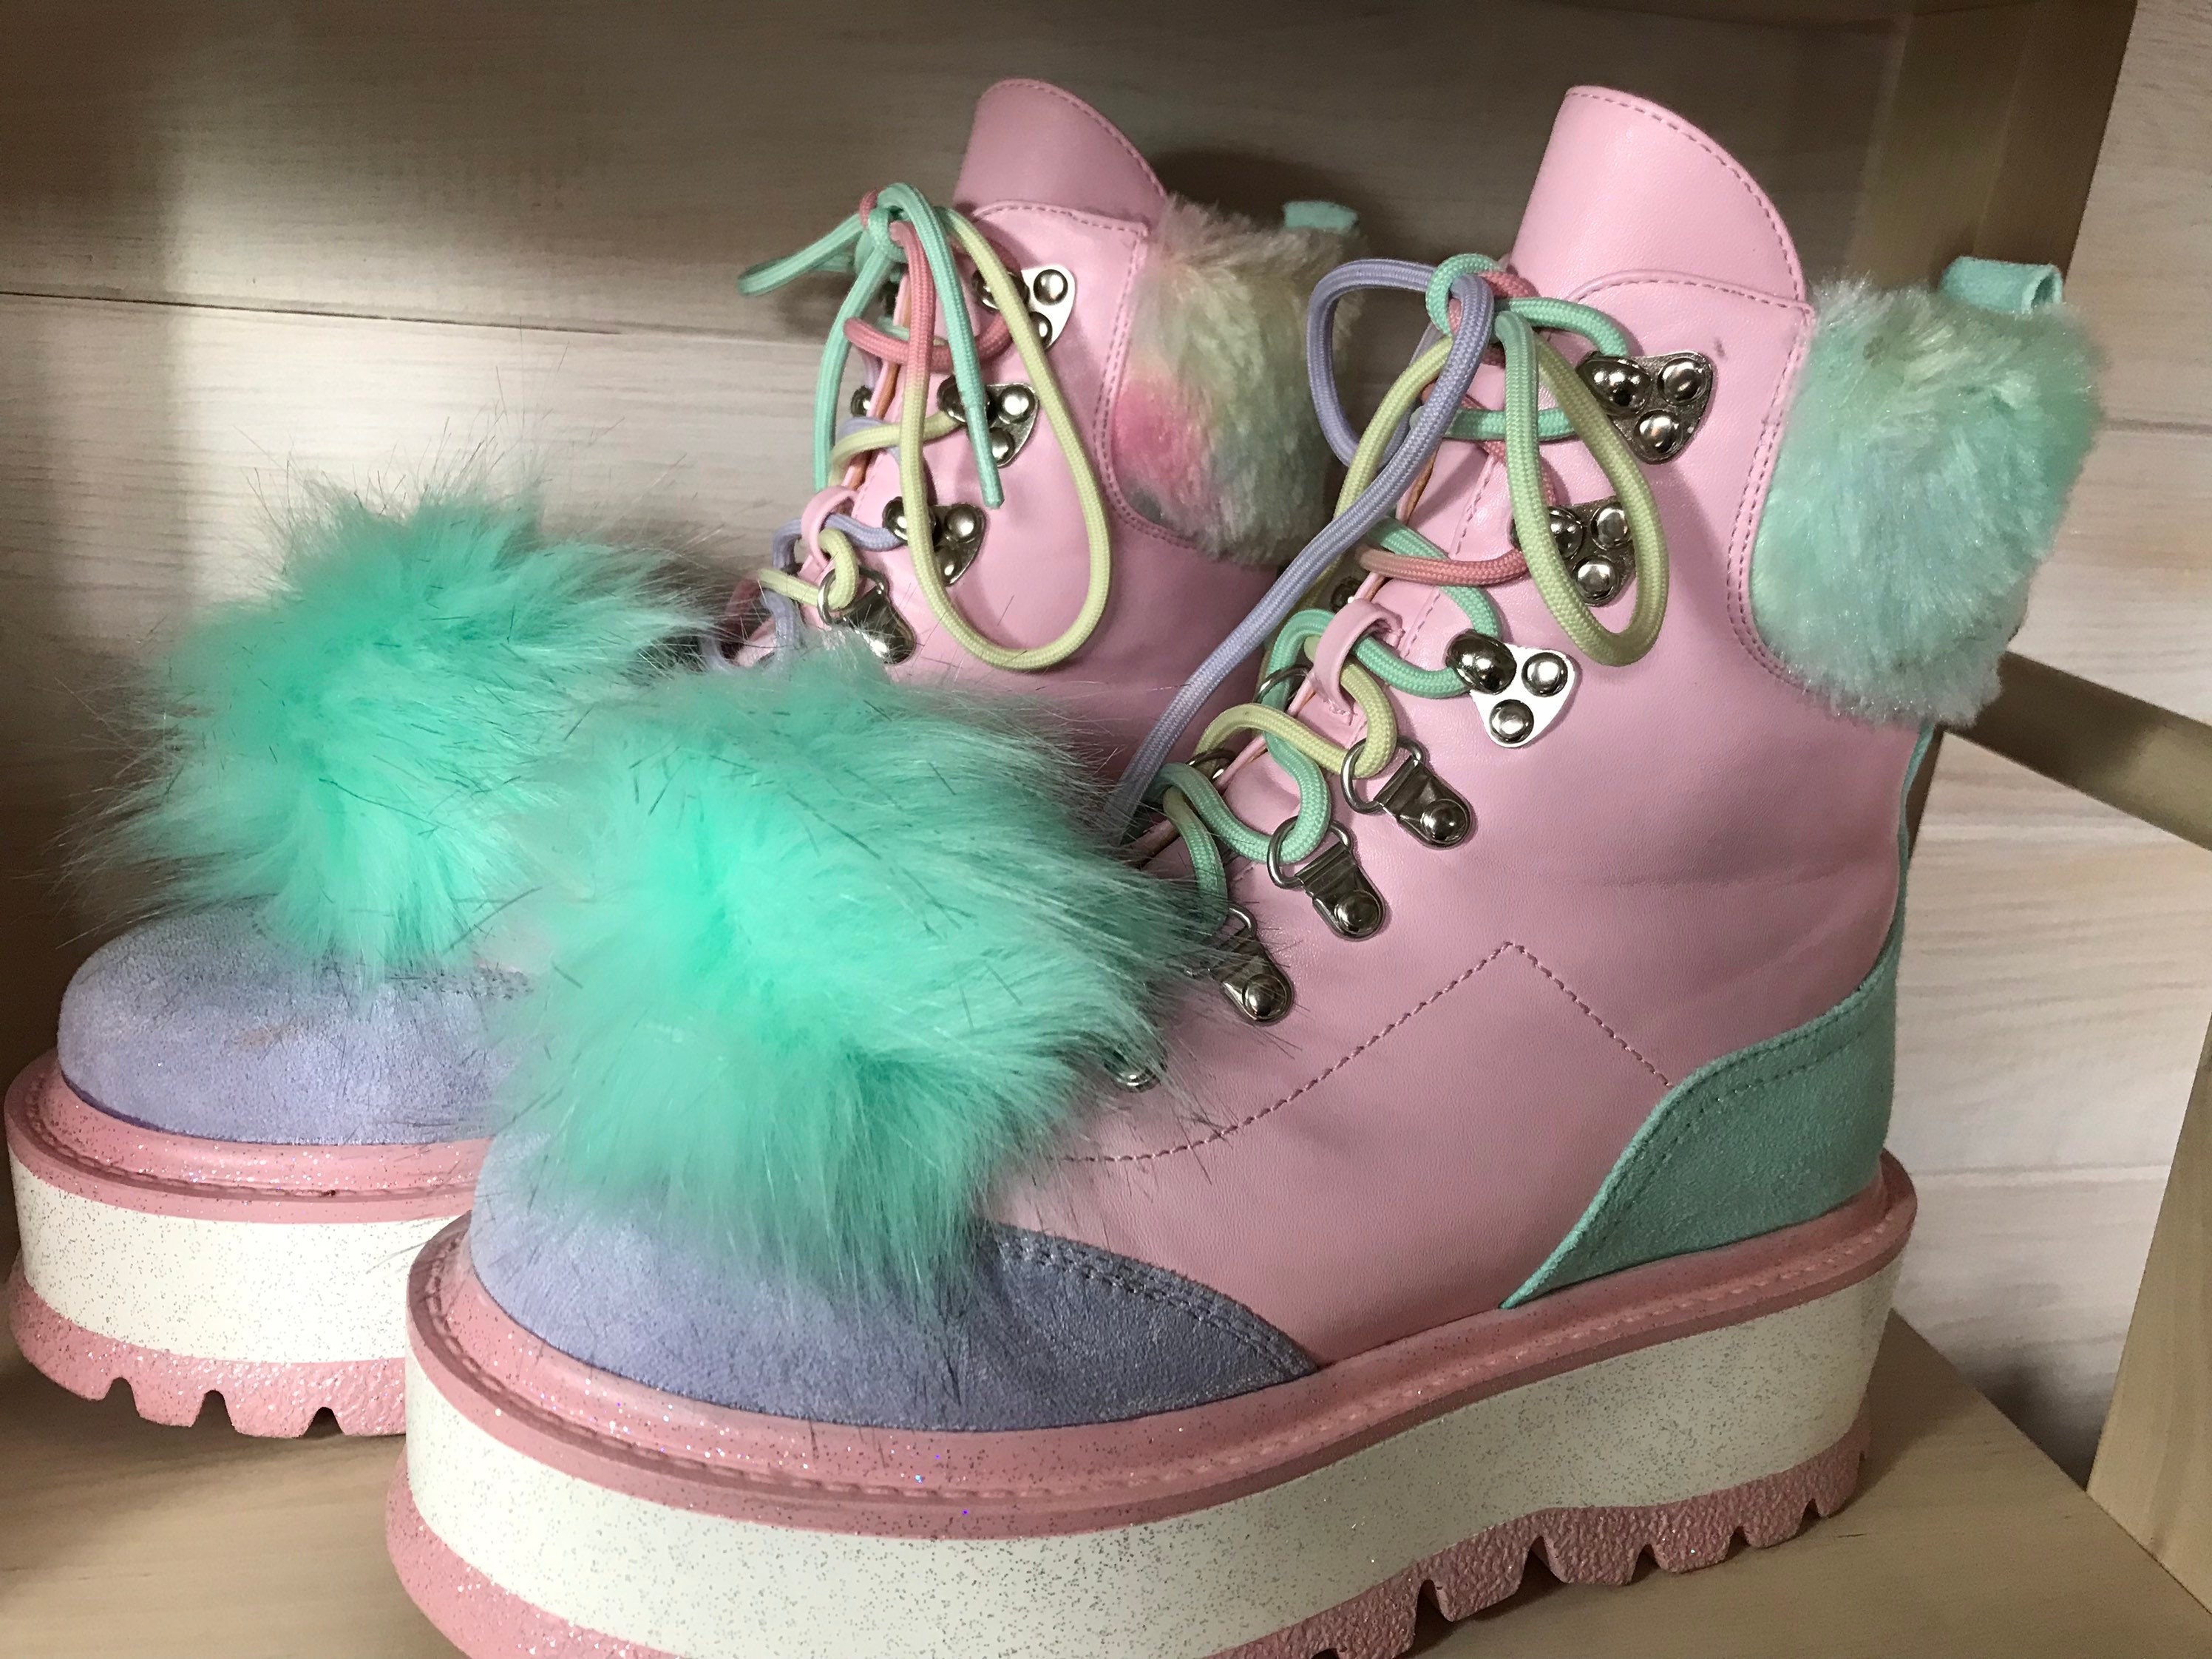 COWGIRL STYLE Pink Rabbit Fur and Suede Boots , pink boots, fur boots,  winter boots, pink, fur, suede boots, cowgirl fashion, fall fashion, winter  fashion, western boots, gypsy boots, PINK, wholesale boots